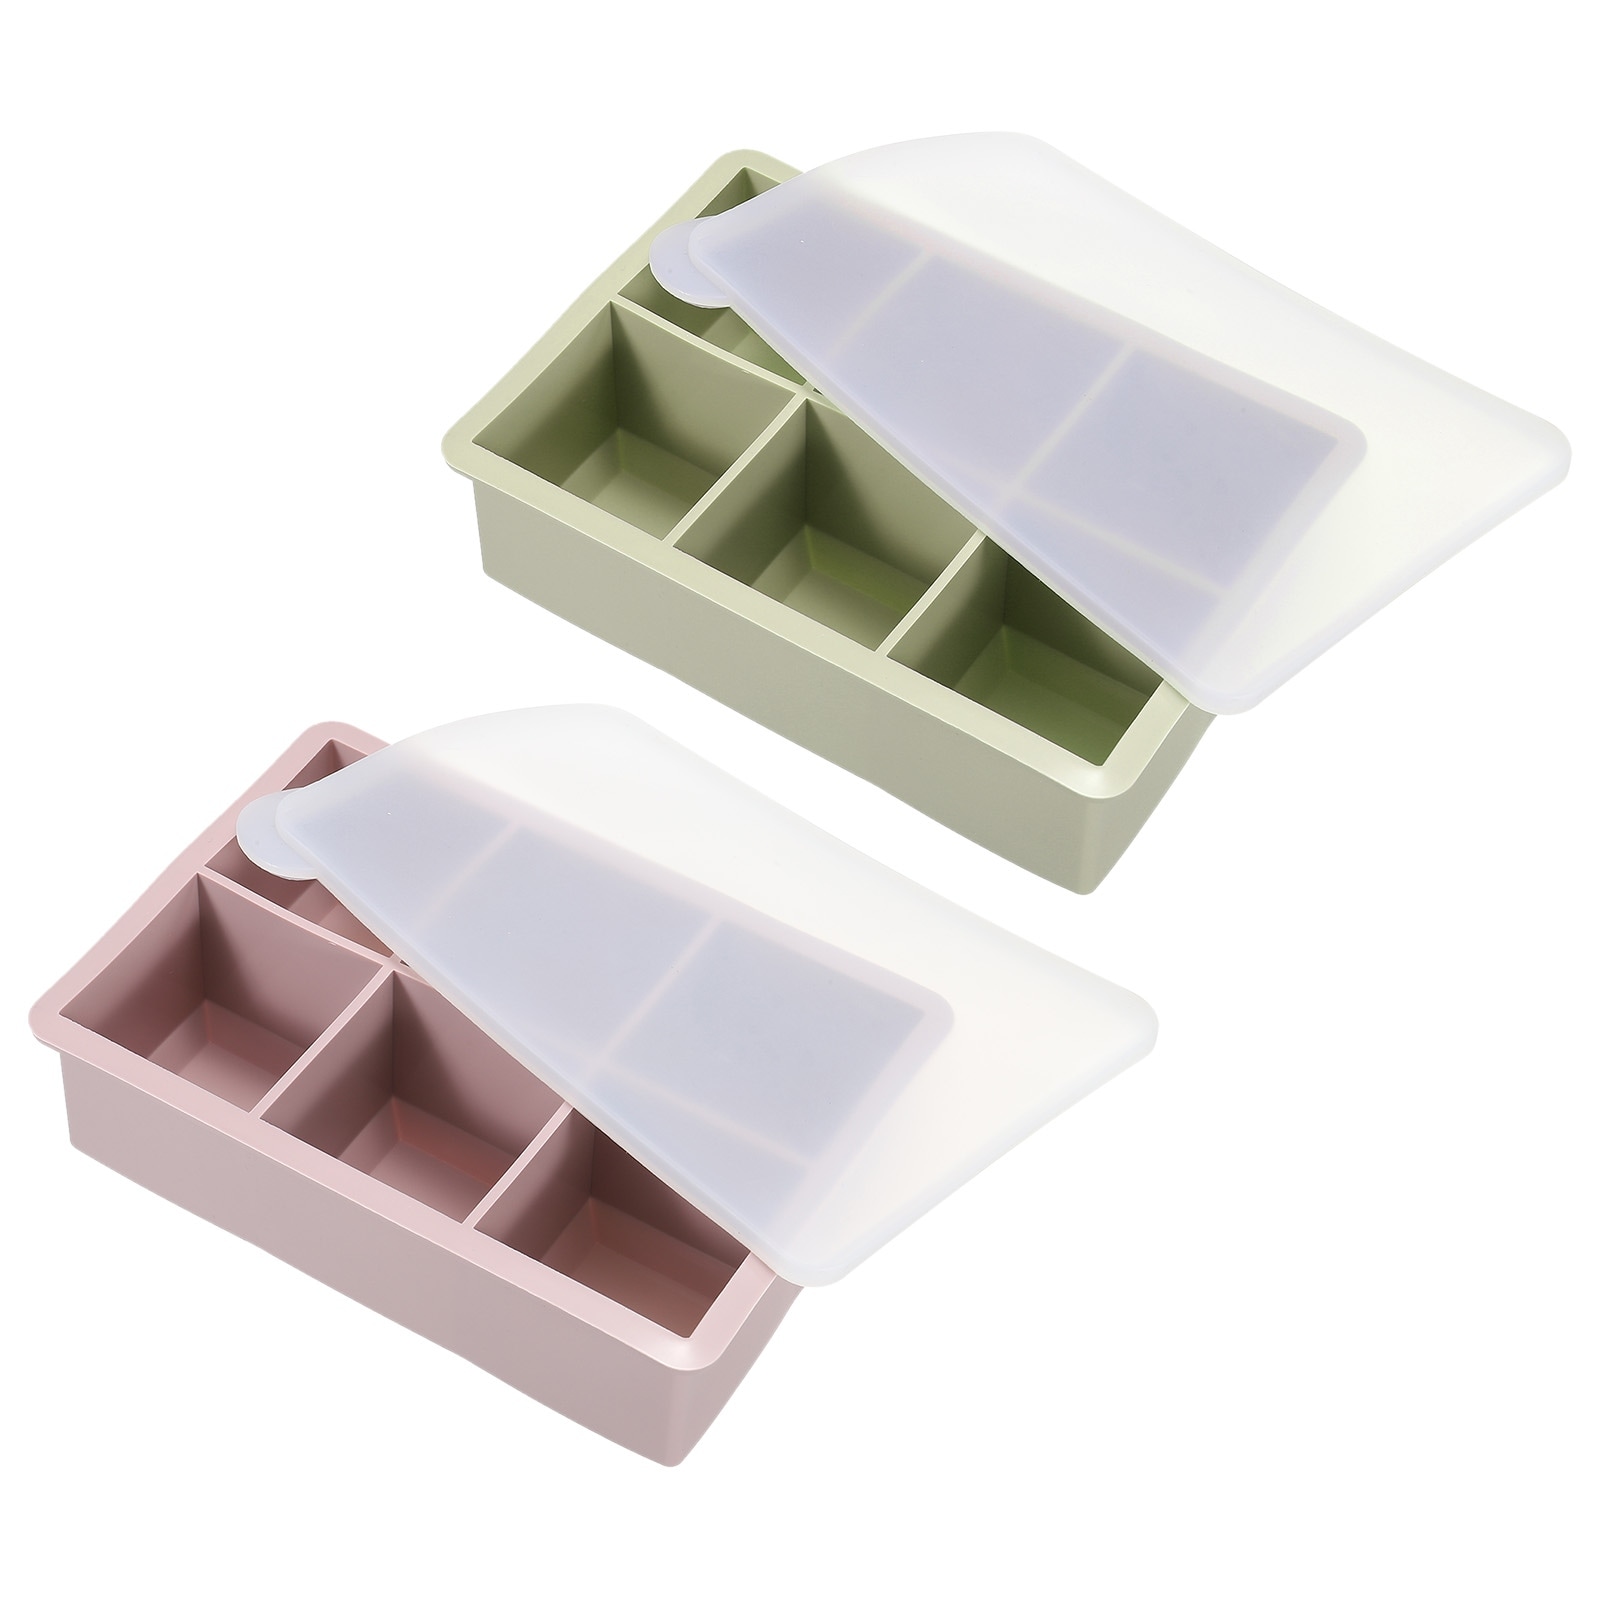 https://ak1.ostkcdn.com/images/products/is/images/direct/dd97c0d816e6c8215aeb2430232aae43b3e34da1/Ice-Cube-Mold%28Set-of-2%29%2C-6x2-Inch-Silicone-Ice-Cube-Tray-with-Lid%28Green%2CPink%29.jpg